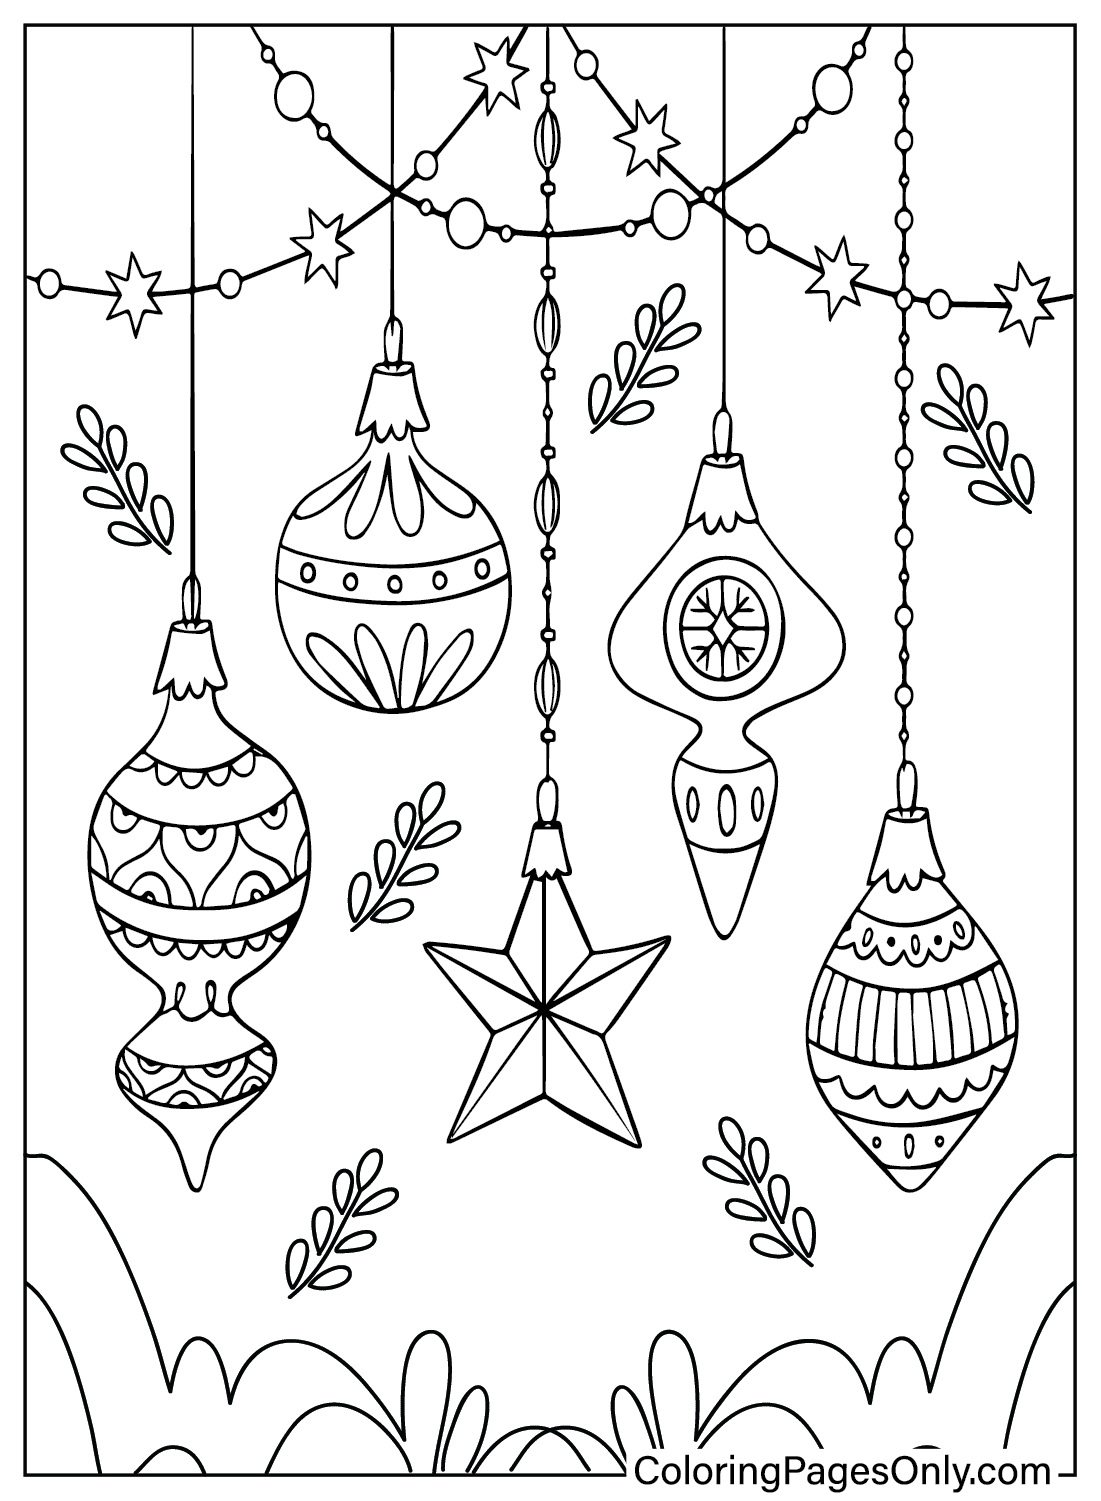 Christmas Ornaments to Color